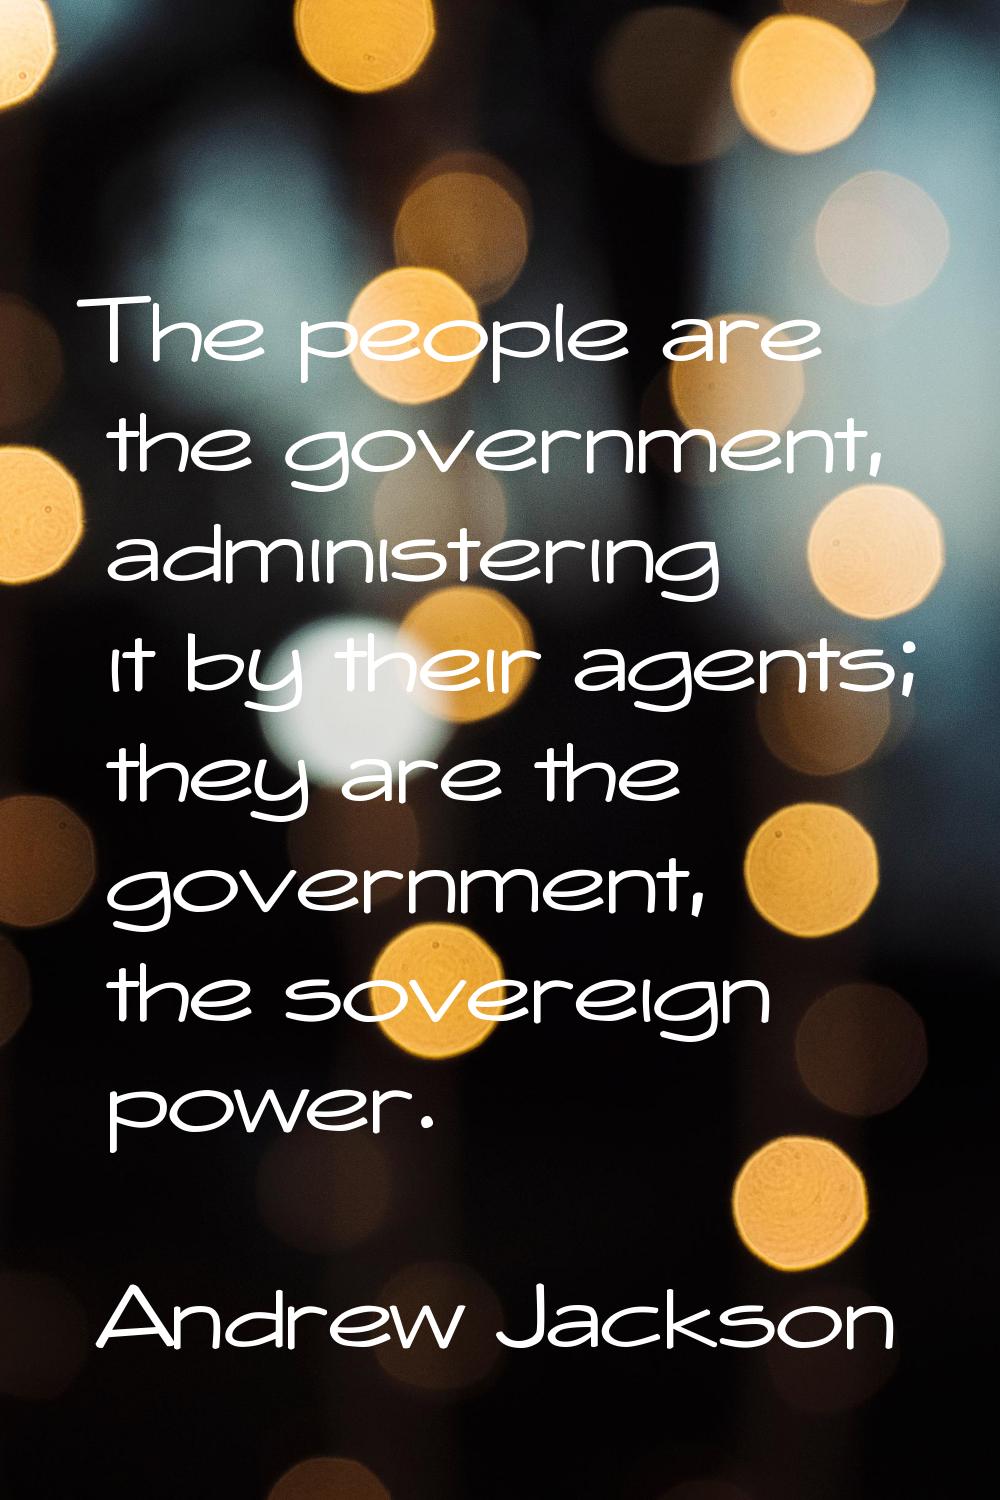 The people are the government, administering it by their agents; they are the government, the sover